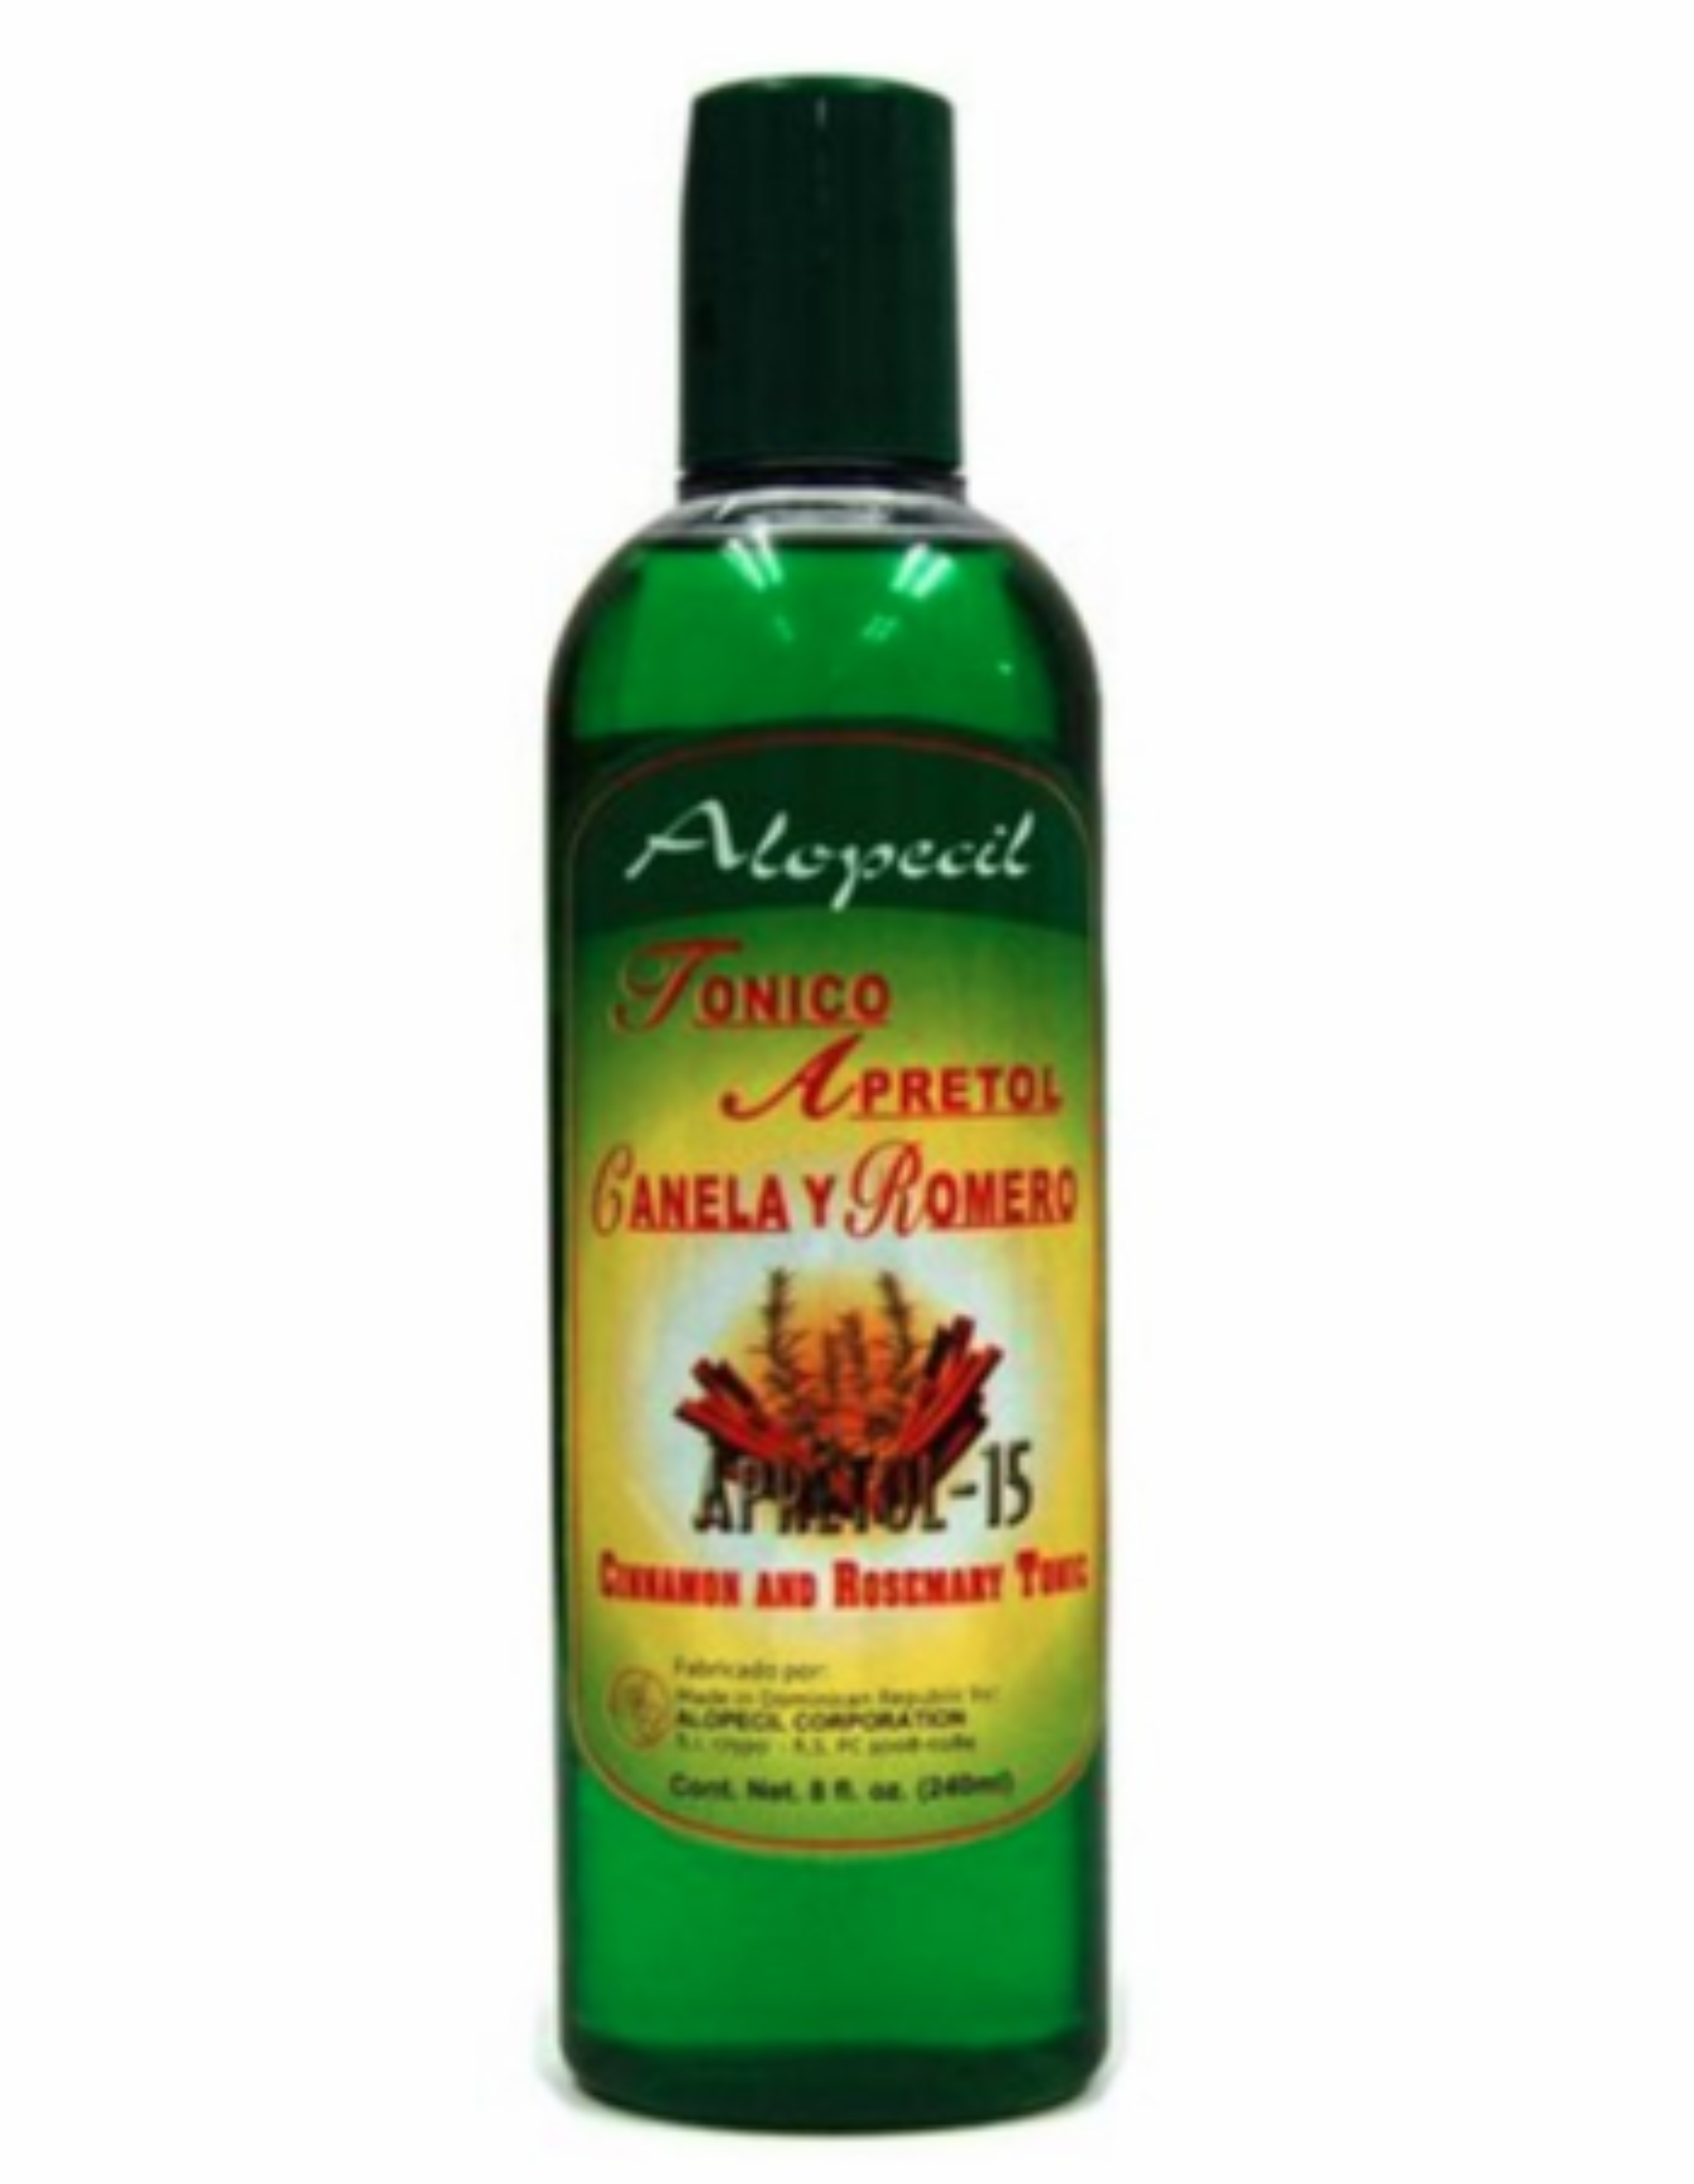 Alopecil Apretol Tonic Oil with Cinnamon and Rosemary 8 oz